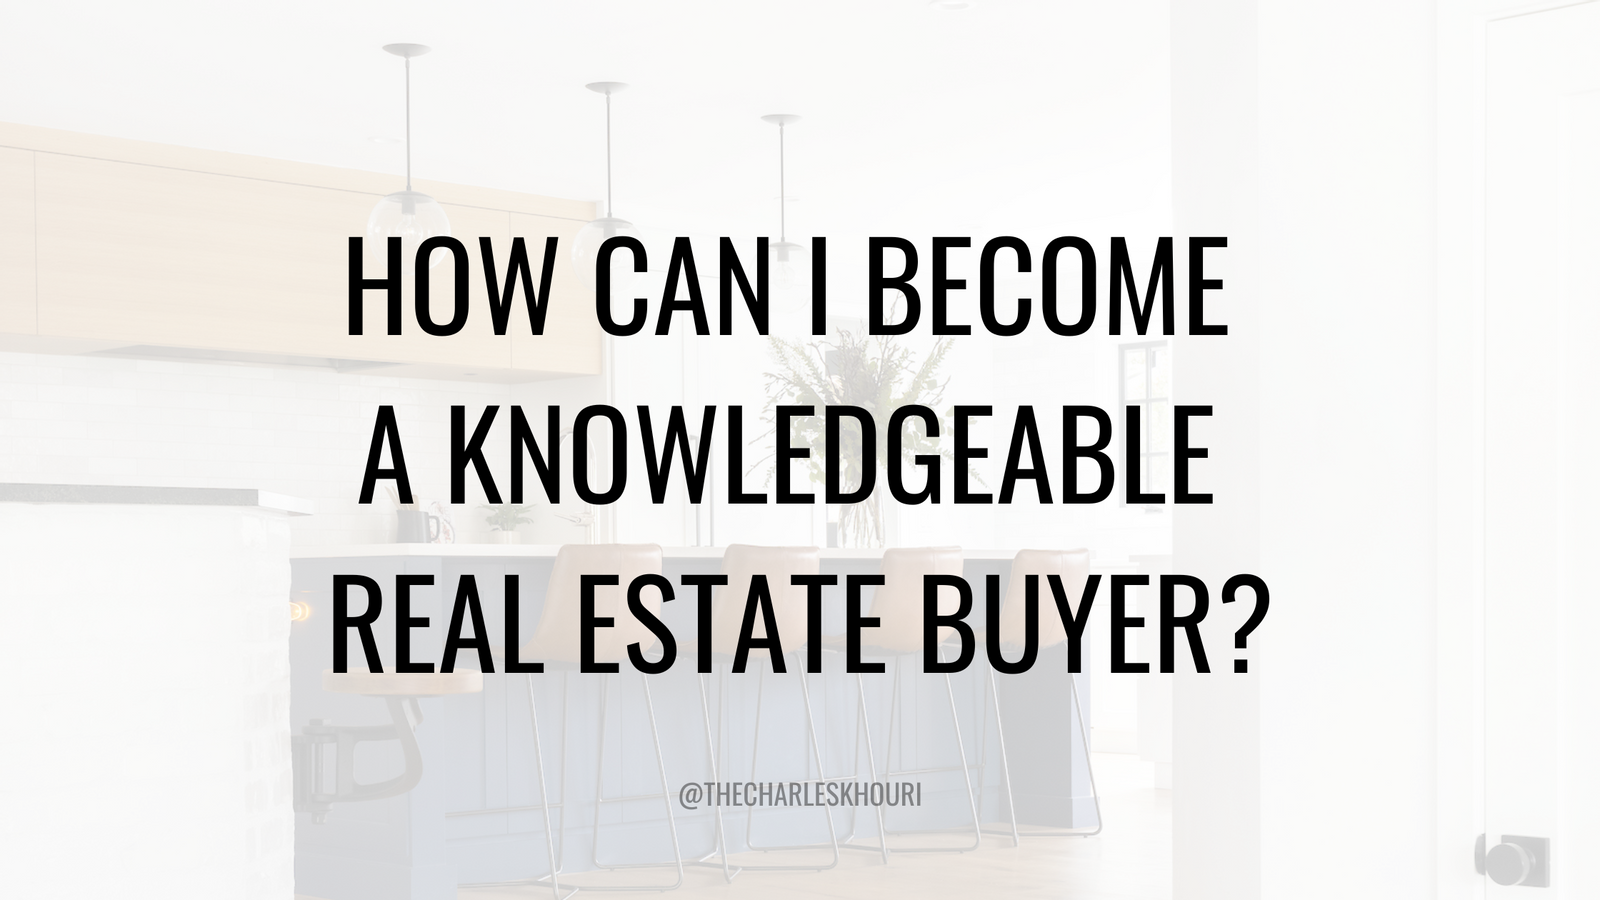 How can I become a knowledgeable real estate buyer?